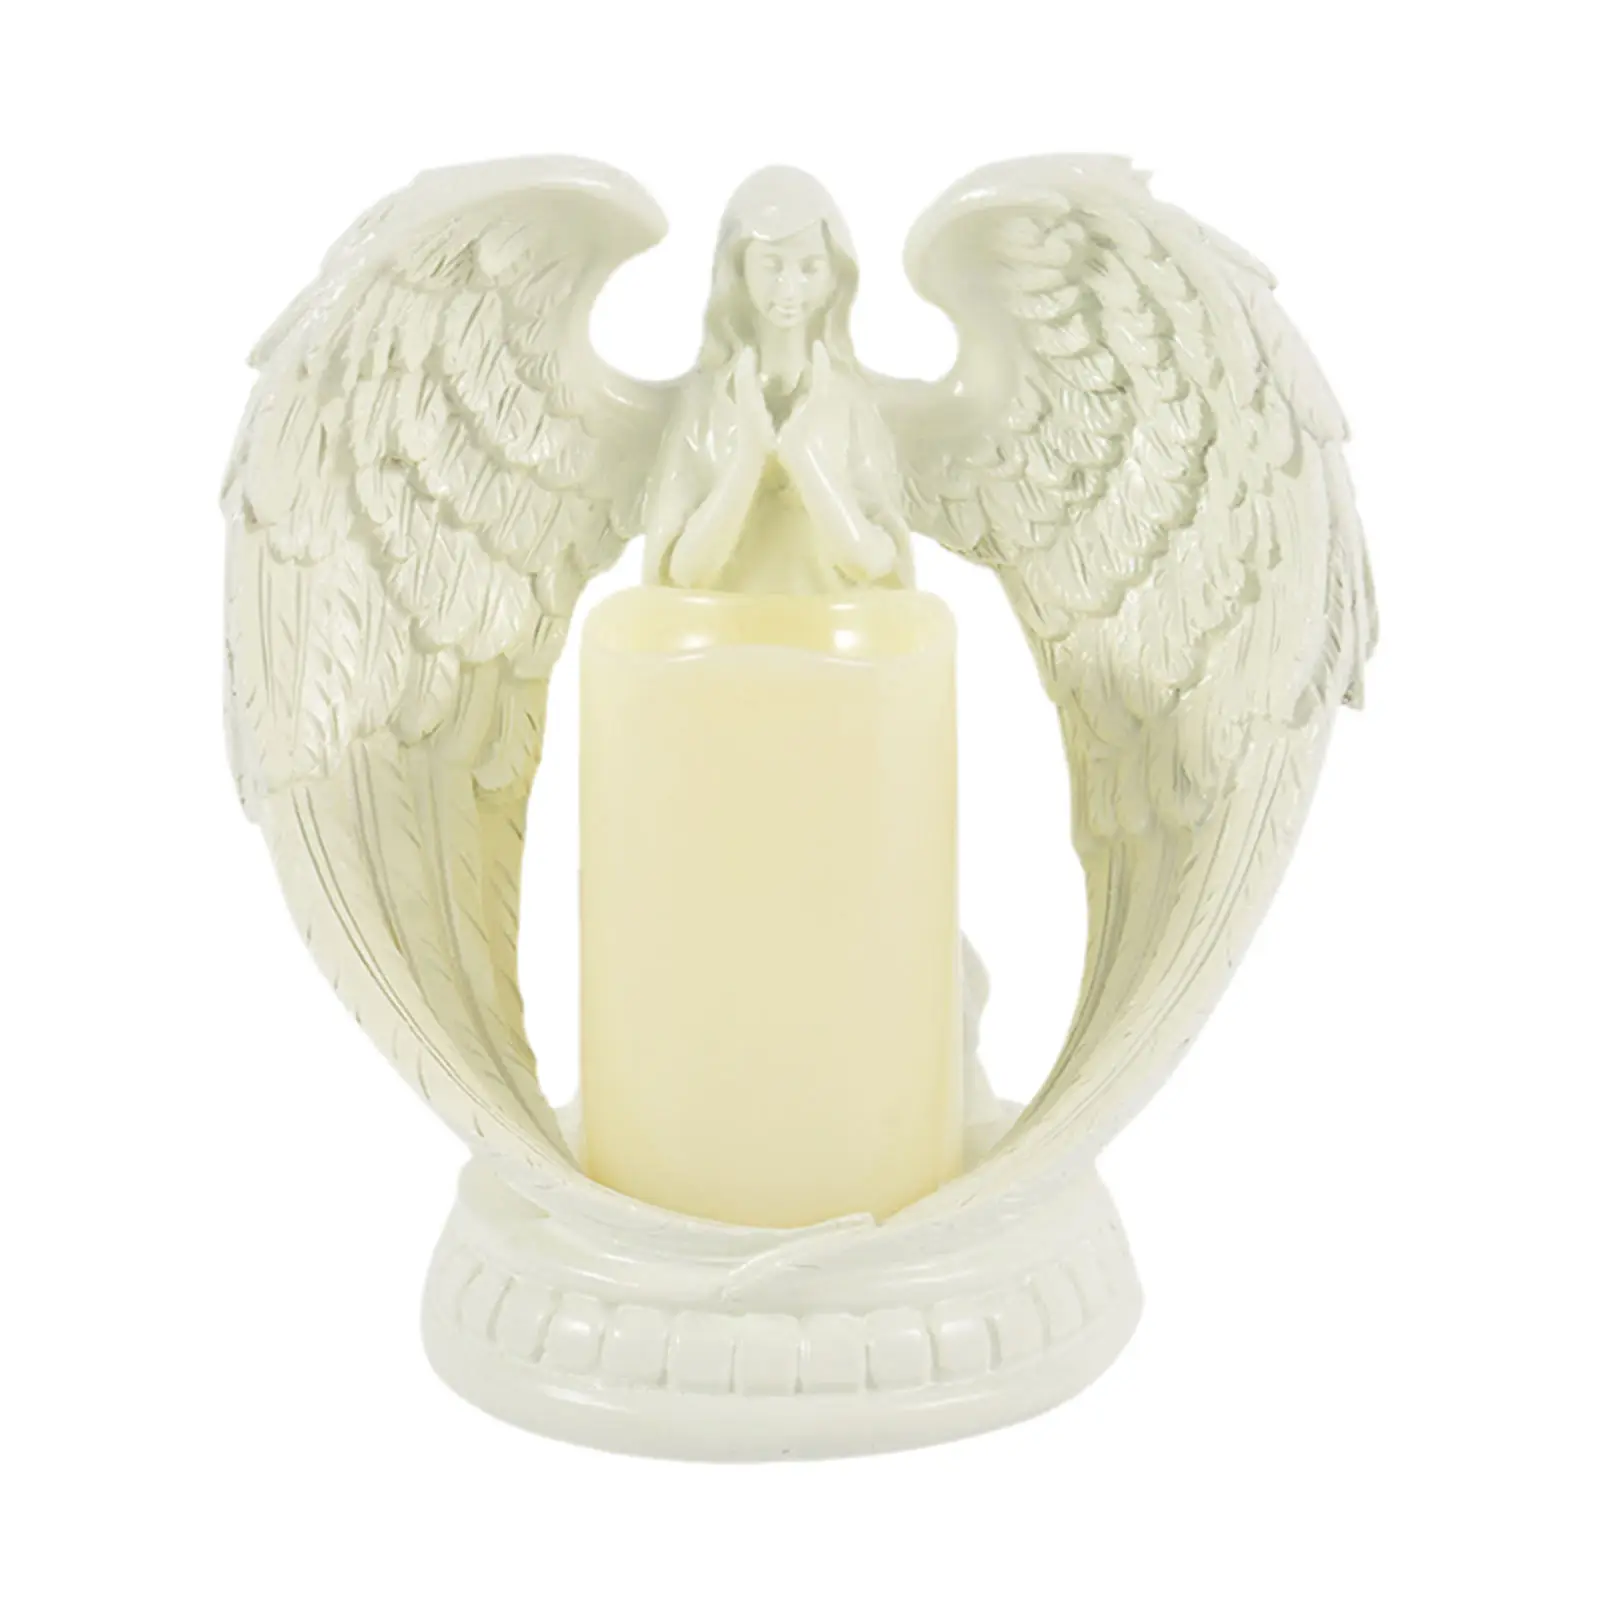 Angel Figurine Figure Flameless Candle Holders Stand Retro Home Wedding Church Decoration Resin Vintage Decor